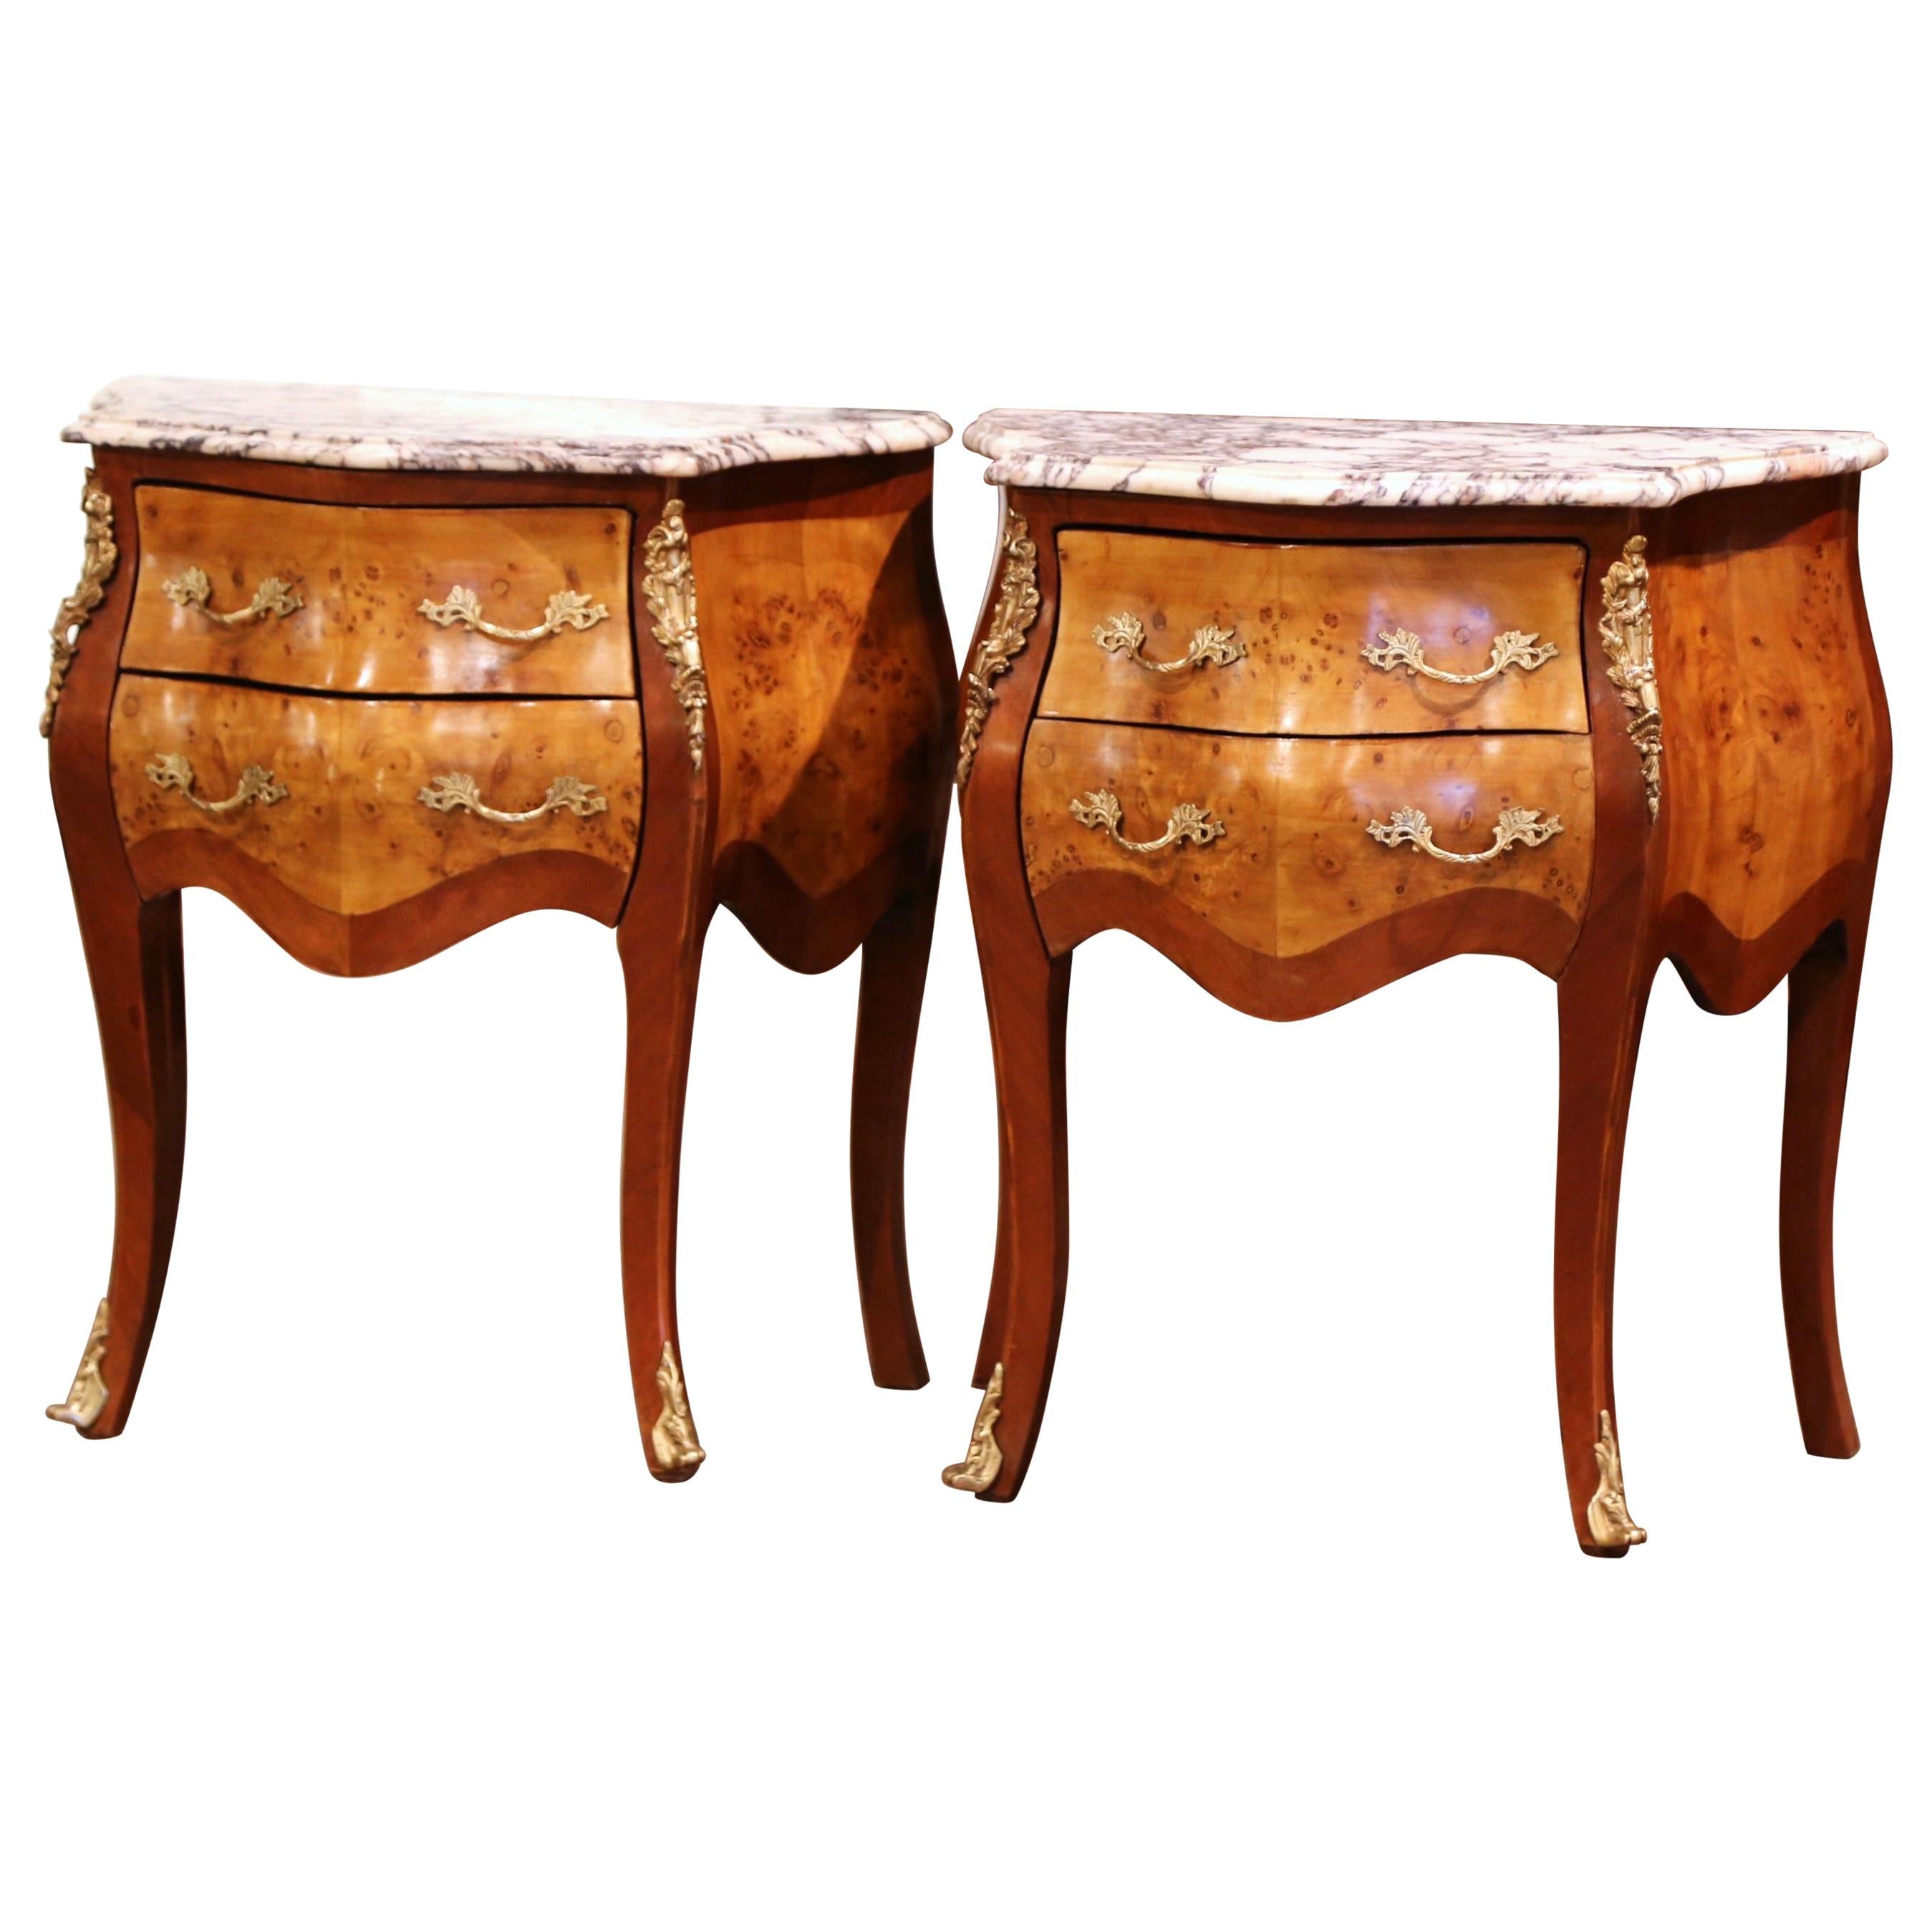 Pair of Vintage Louis XV Burl Walnut Bombe Nightstands Chests with Marble Top